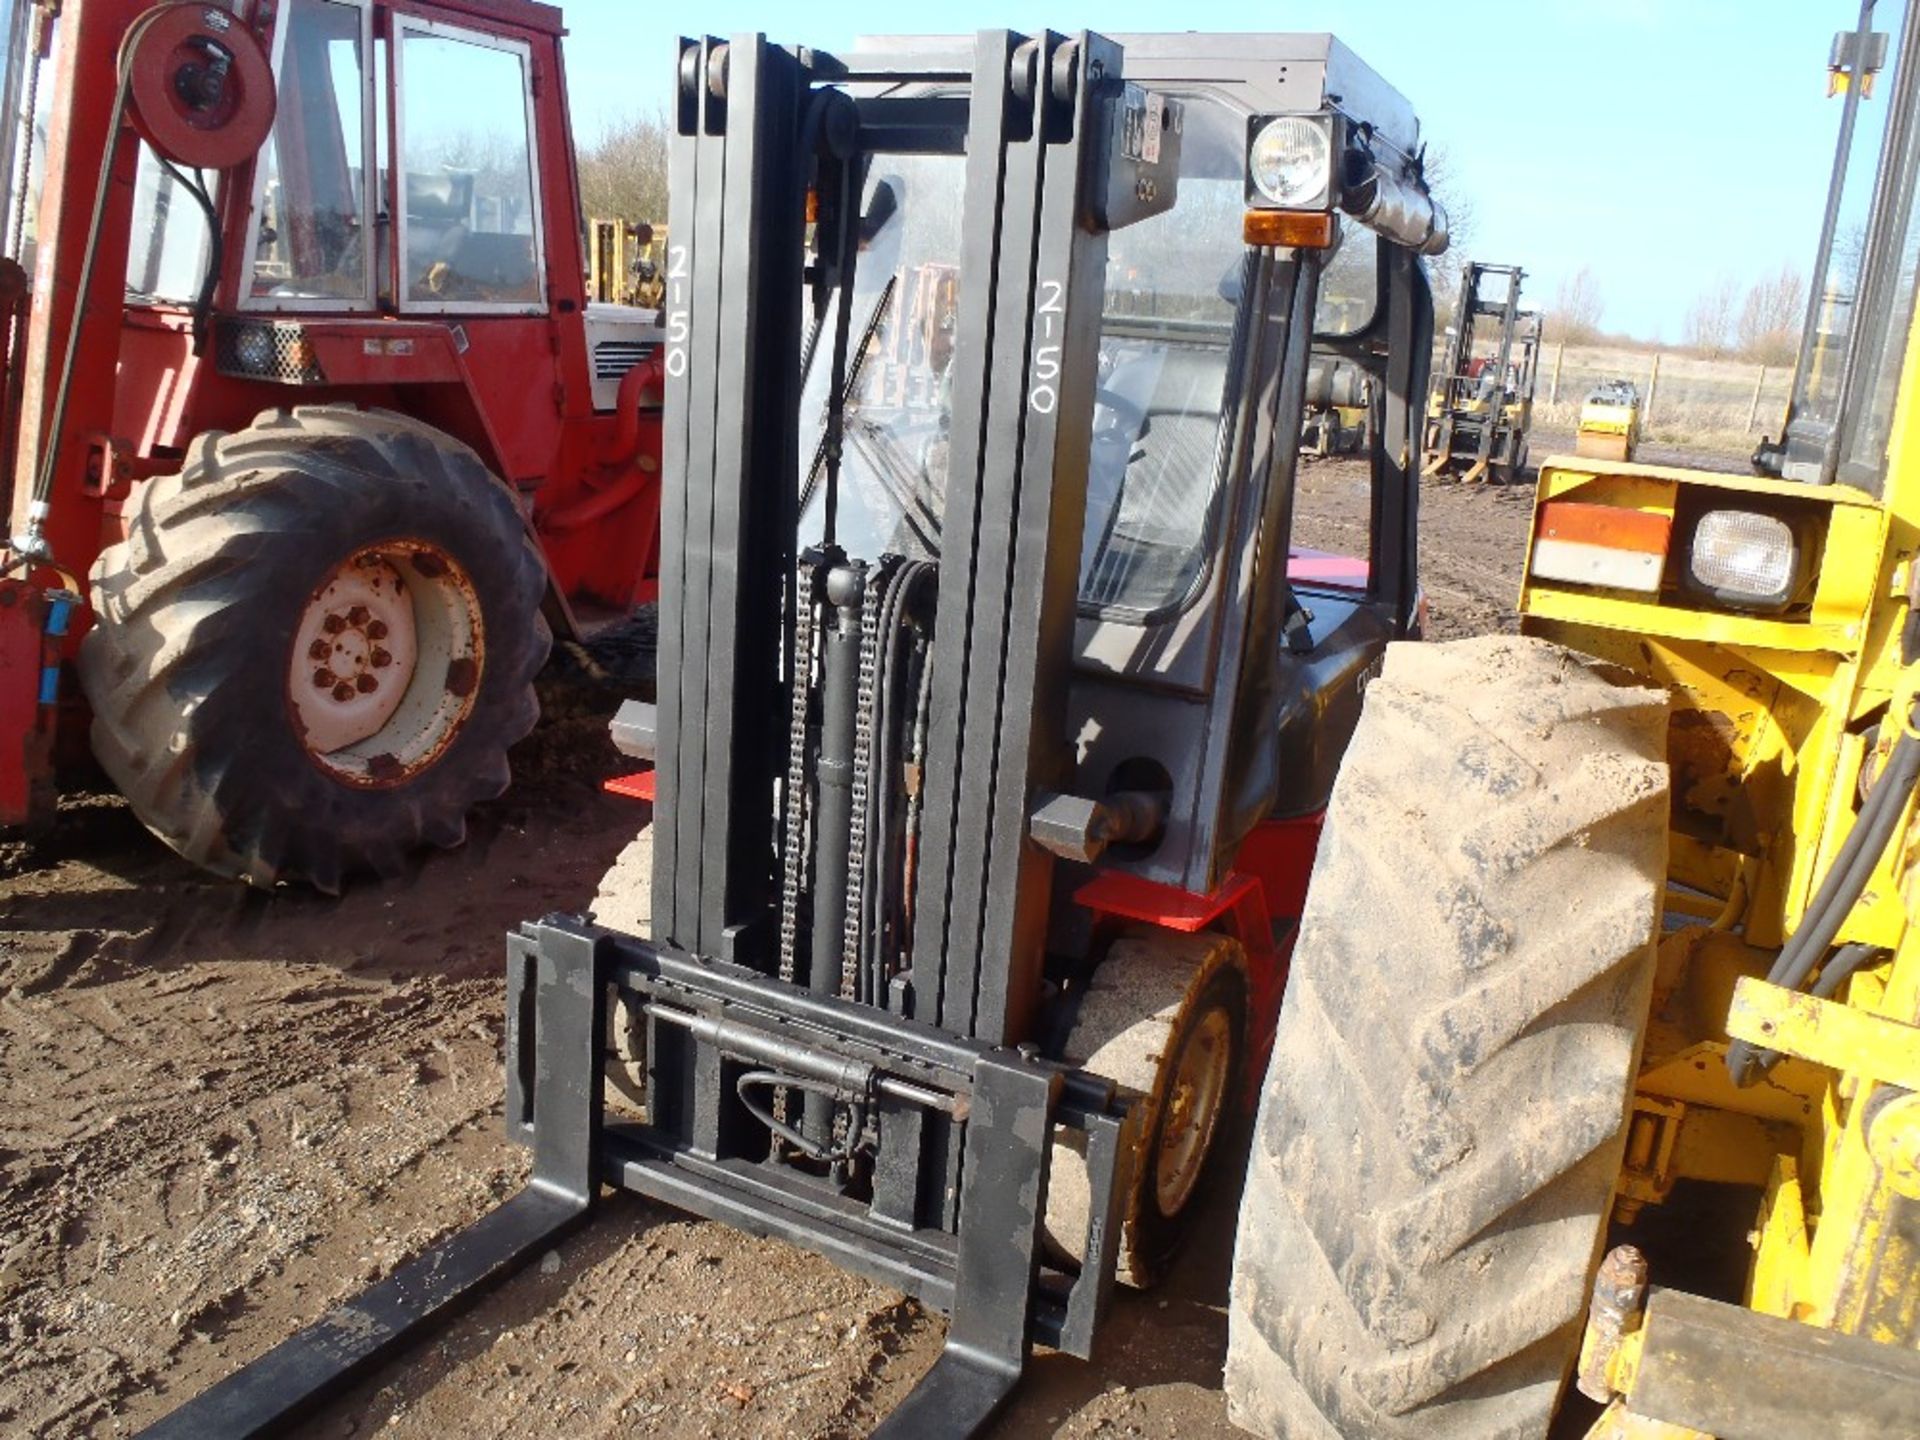 Manitou CD20P Forklift with 3 Stage Free Lift Mast, Side Shift, Forks. Serial No. 850552